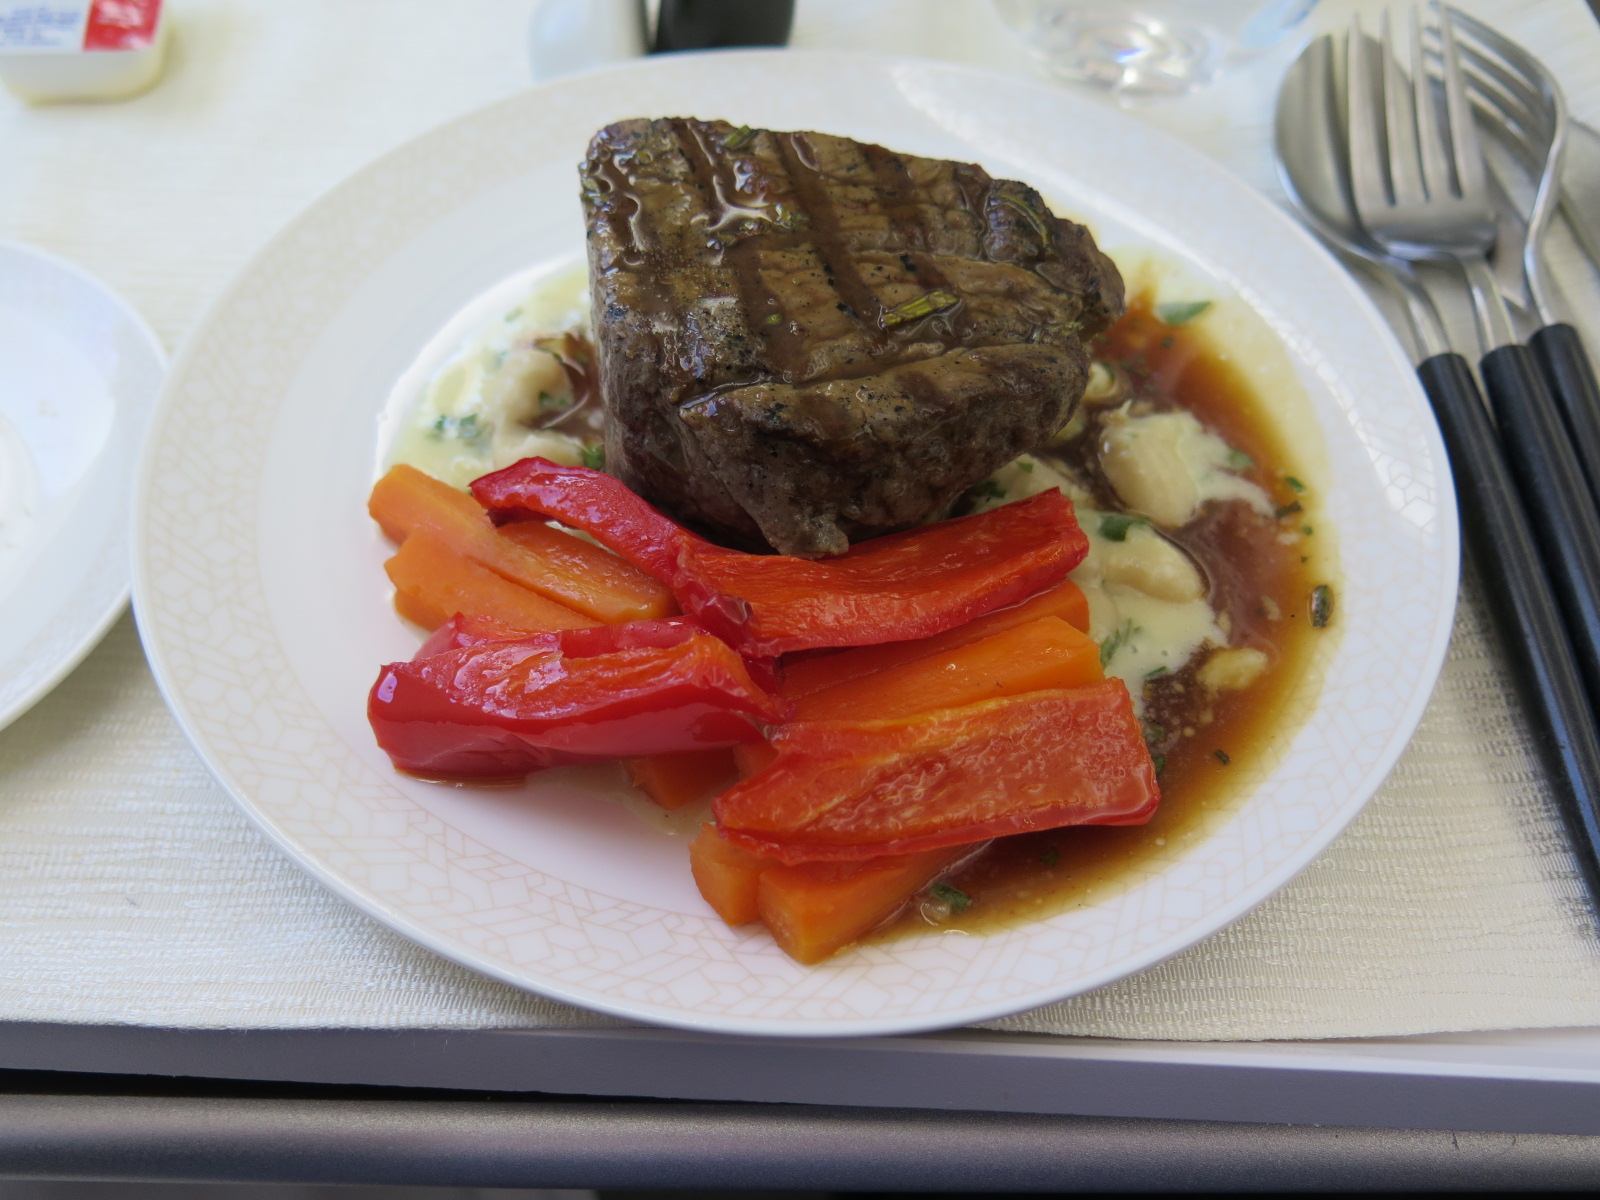 Royal Brunei airlines part of meal